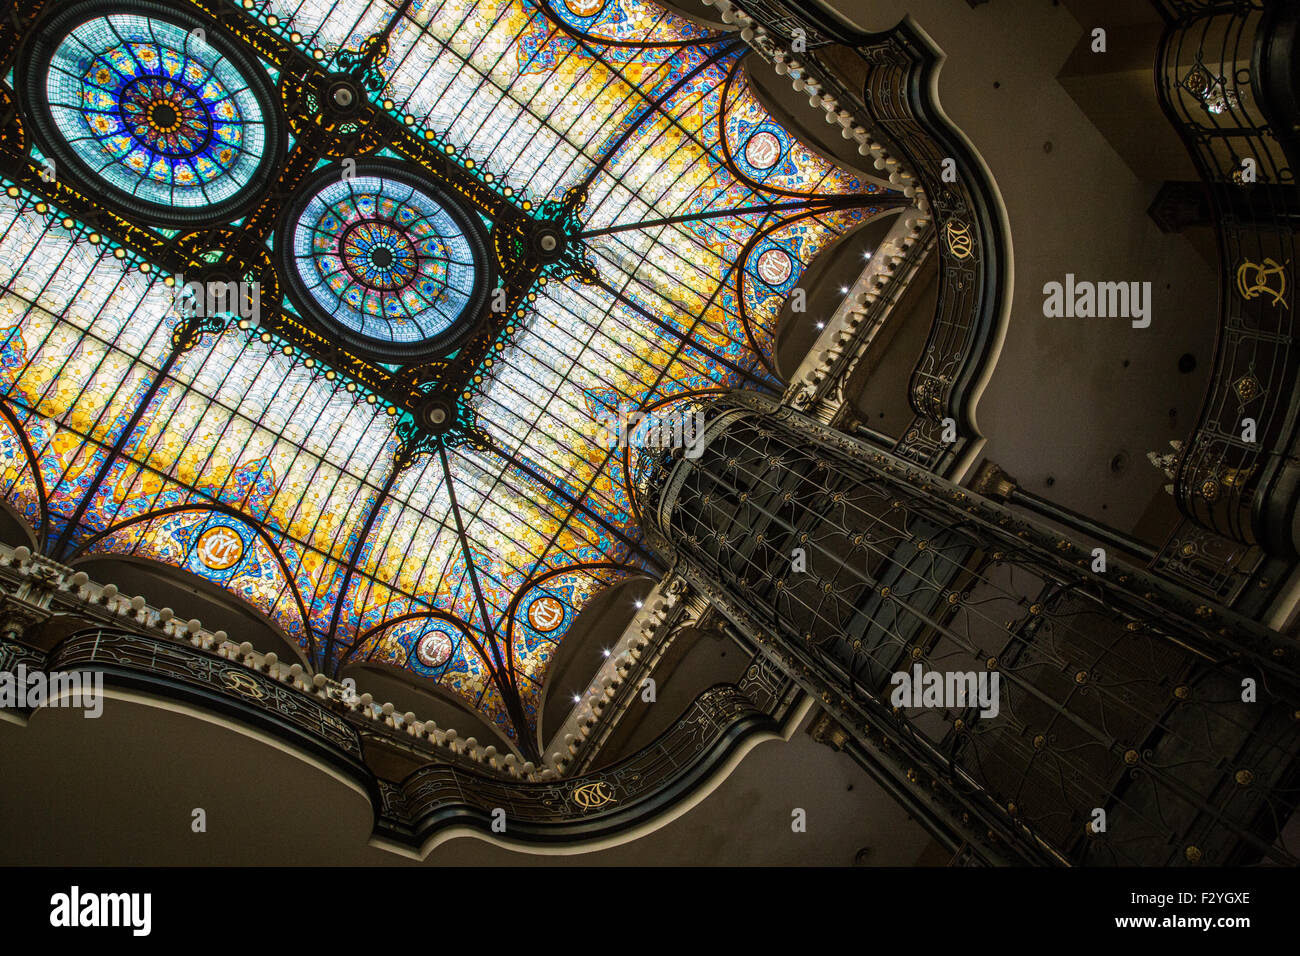 The stained glass roof of the Gran Hotel Ciudad de Mexico, in the Art Nouveau style Stock Photo